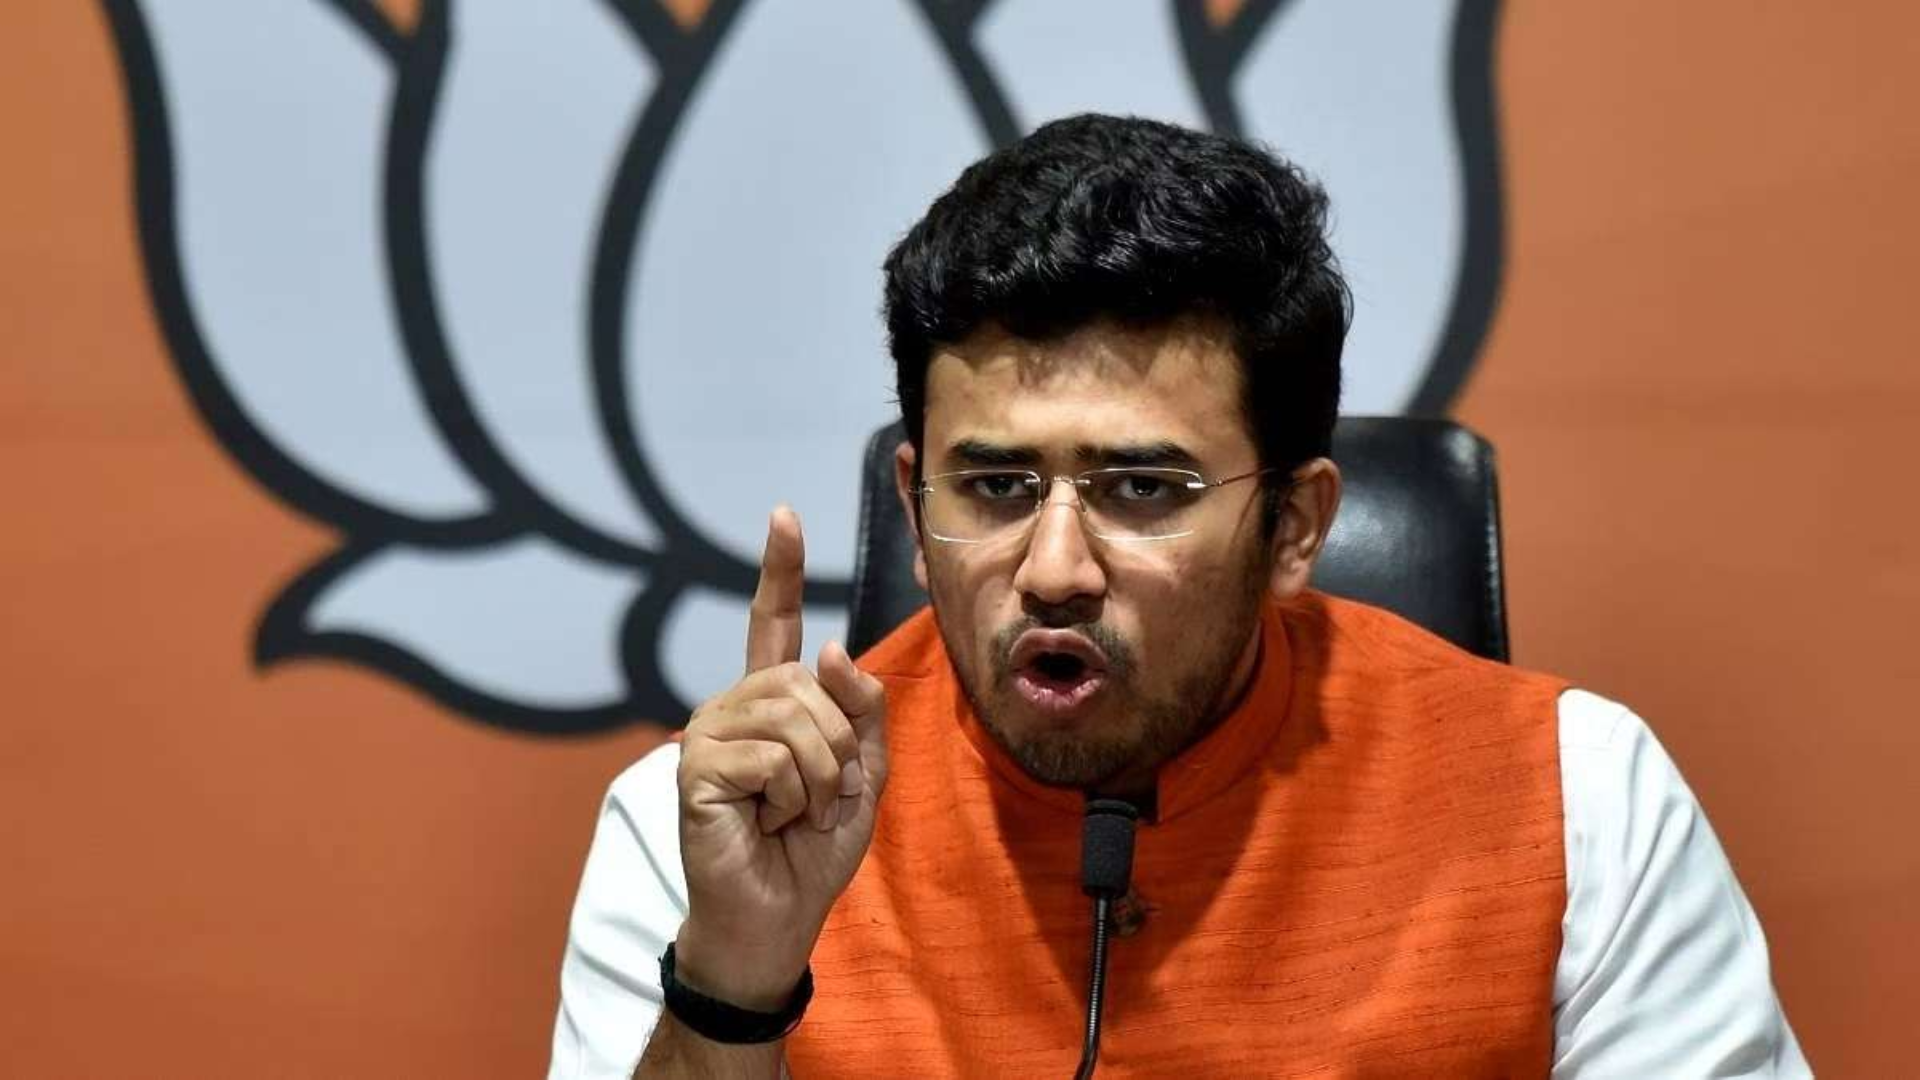 BJP MP Tejasvi Surya Booked By ECI For Seeking Votes On Ground Of Religion